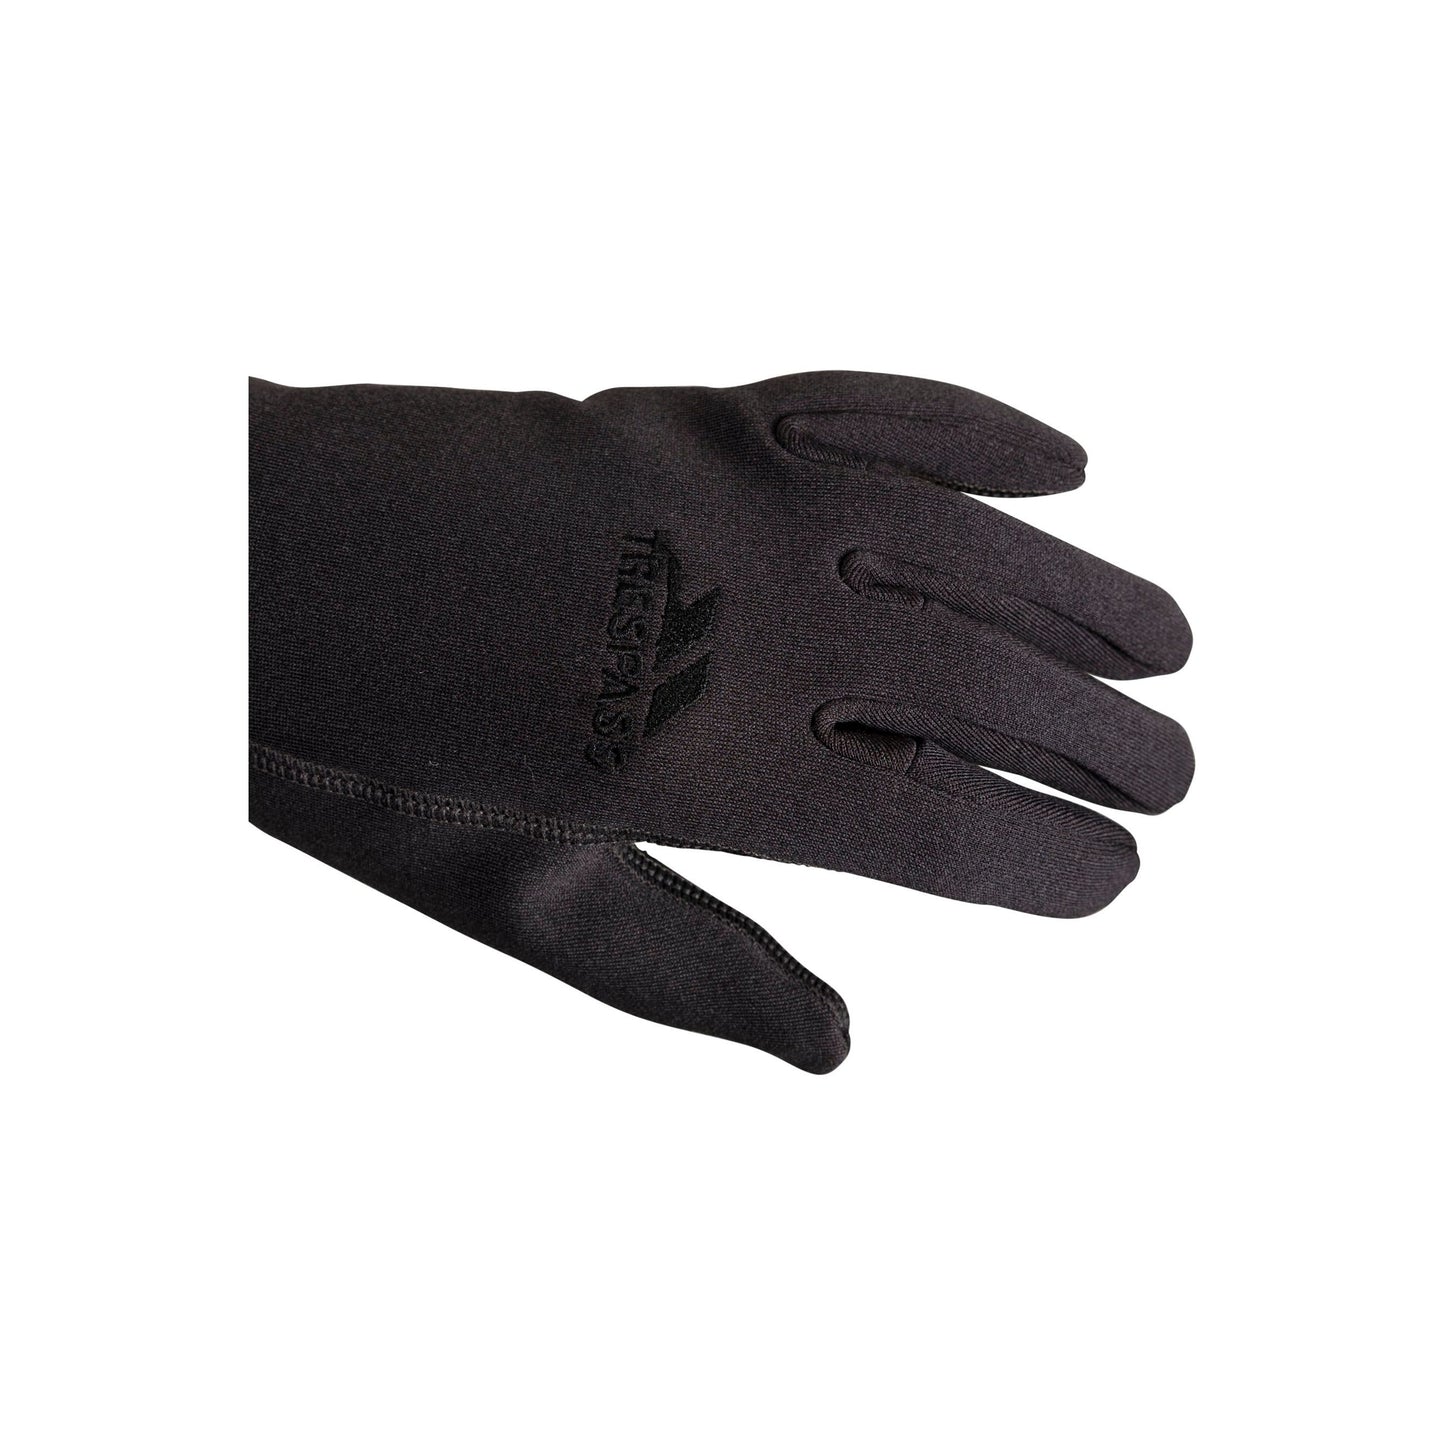 Atherton Kids Touch Screen Insulated Knitted Gloves in Carbon Marl